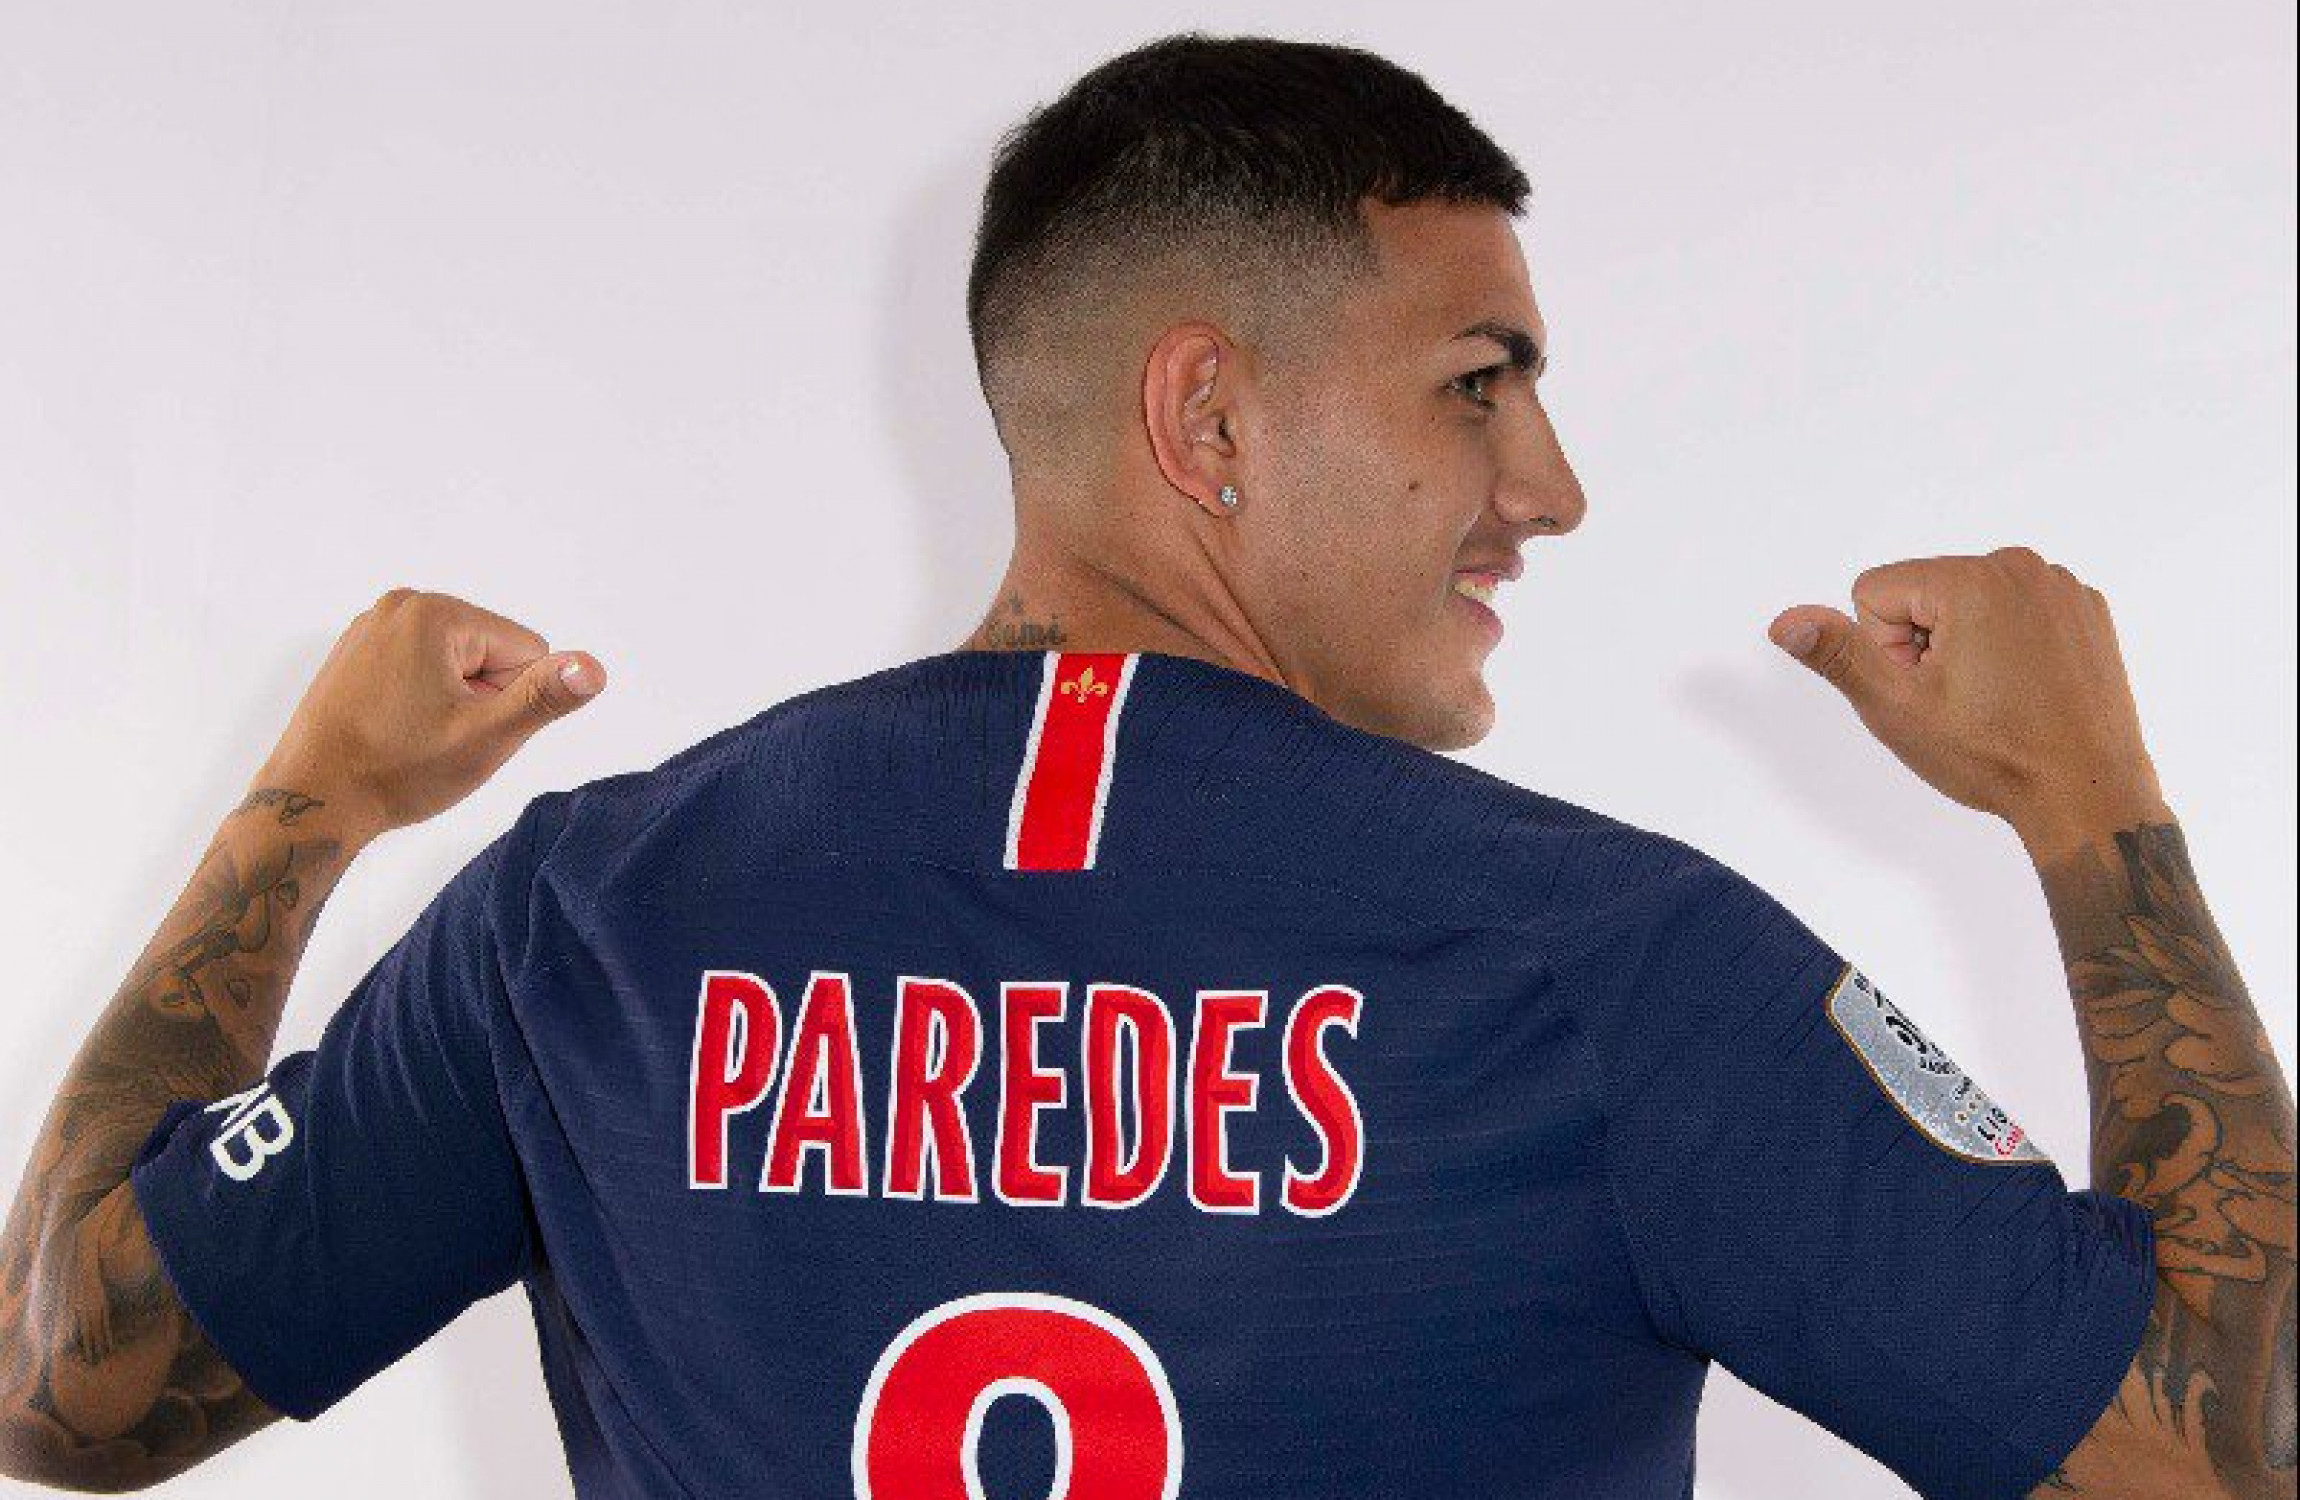 psg players jersey numbers